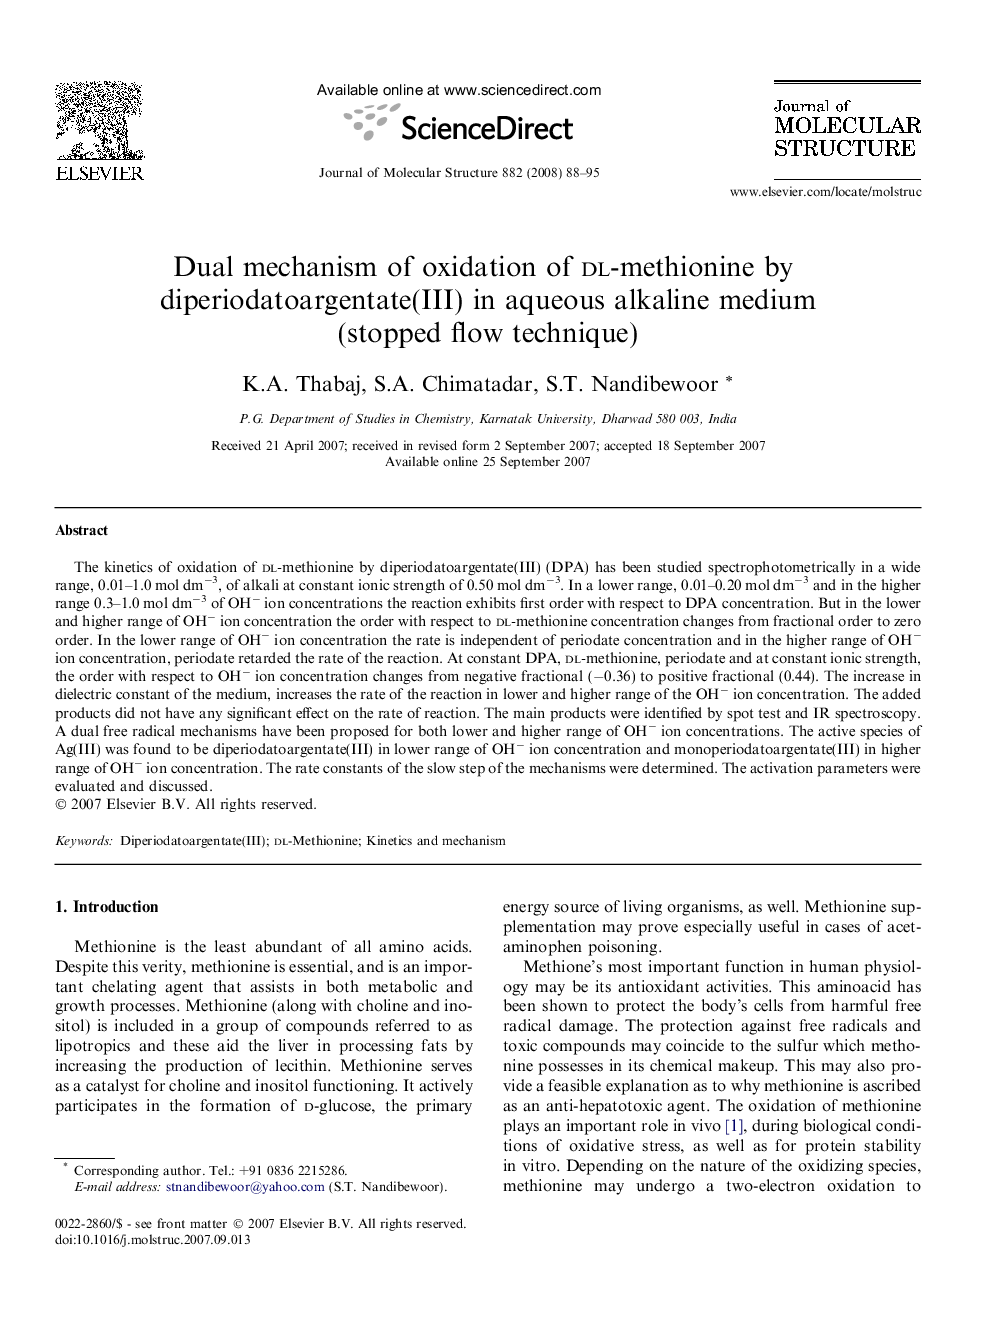 Dual mechanism of oxidation of dl-methionine by diperiodatoargentate(III) in aqueous alkaline medium (stopped flow technique)